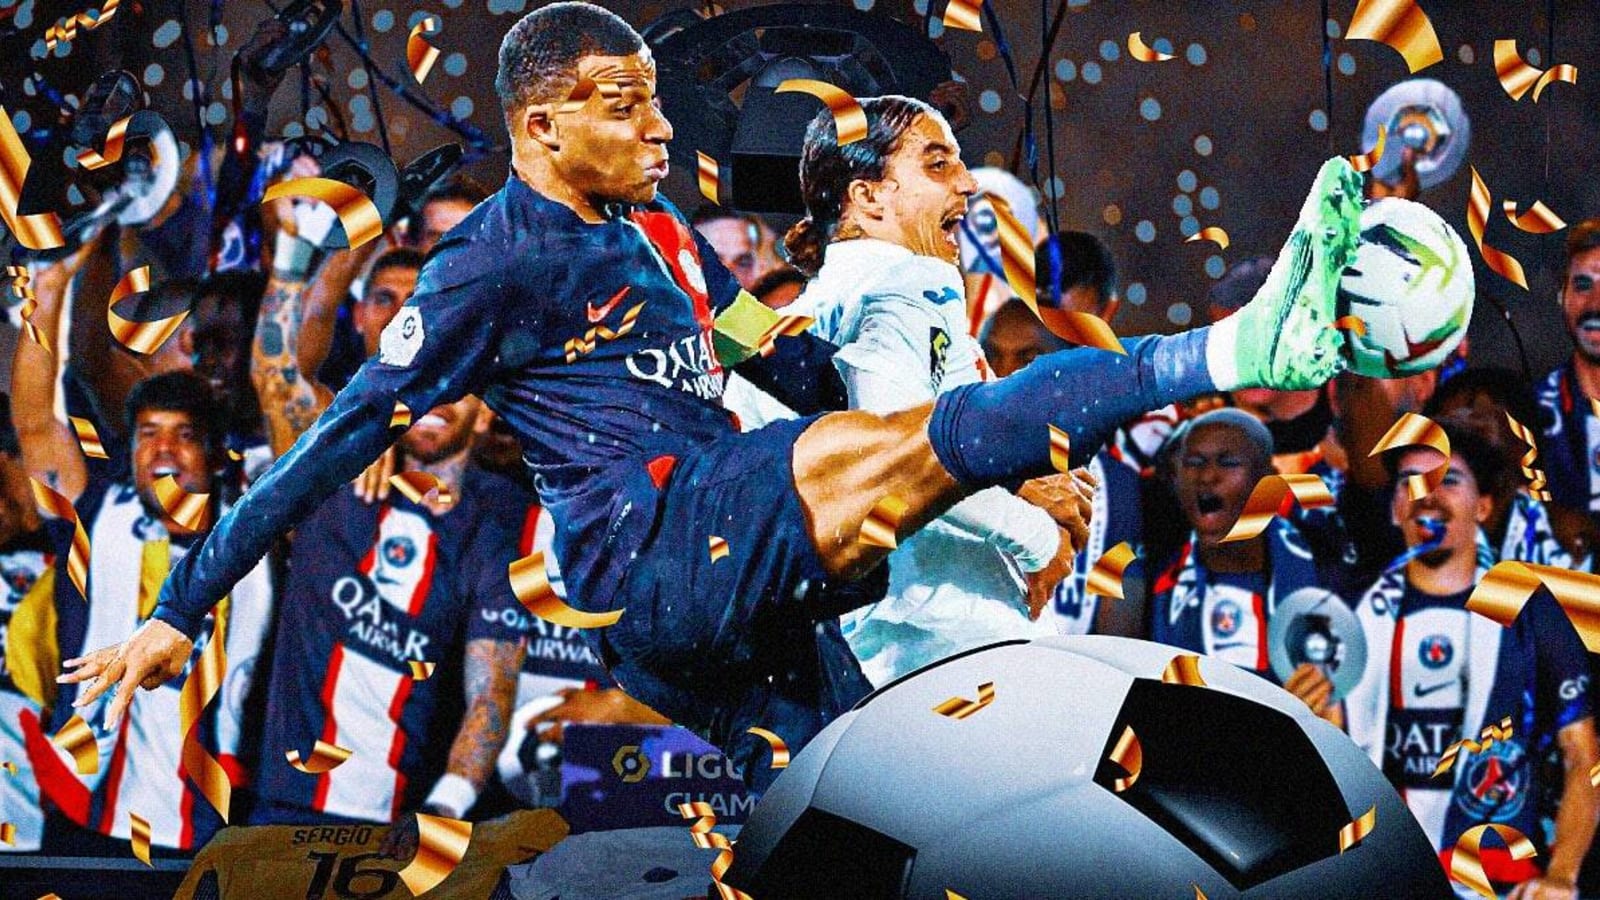 Kylian Mbappe wins third consecutive Ligue 1 title with PSG